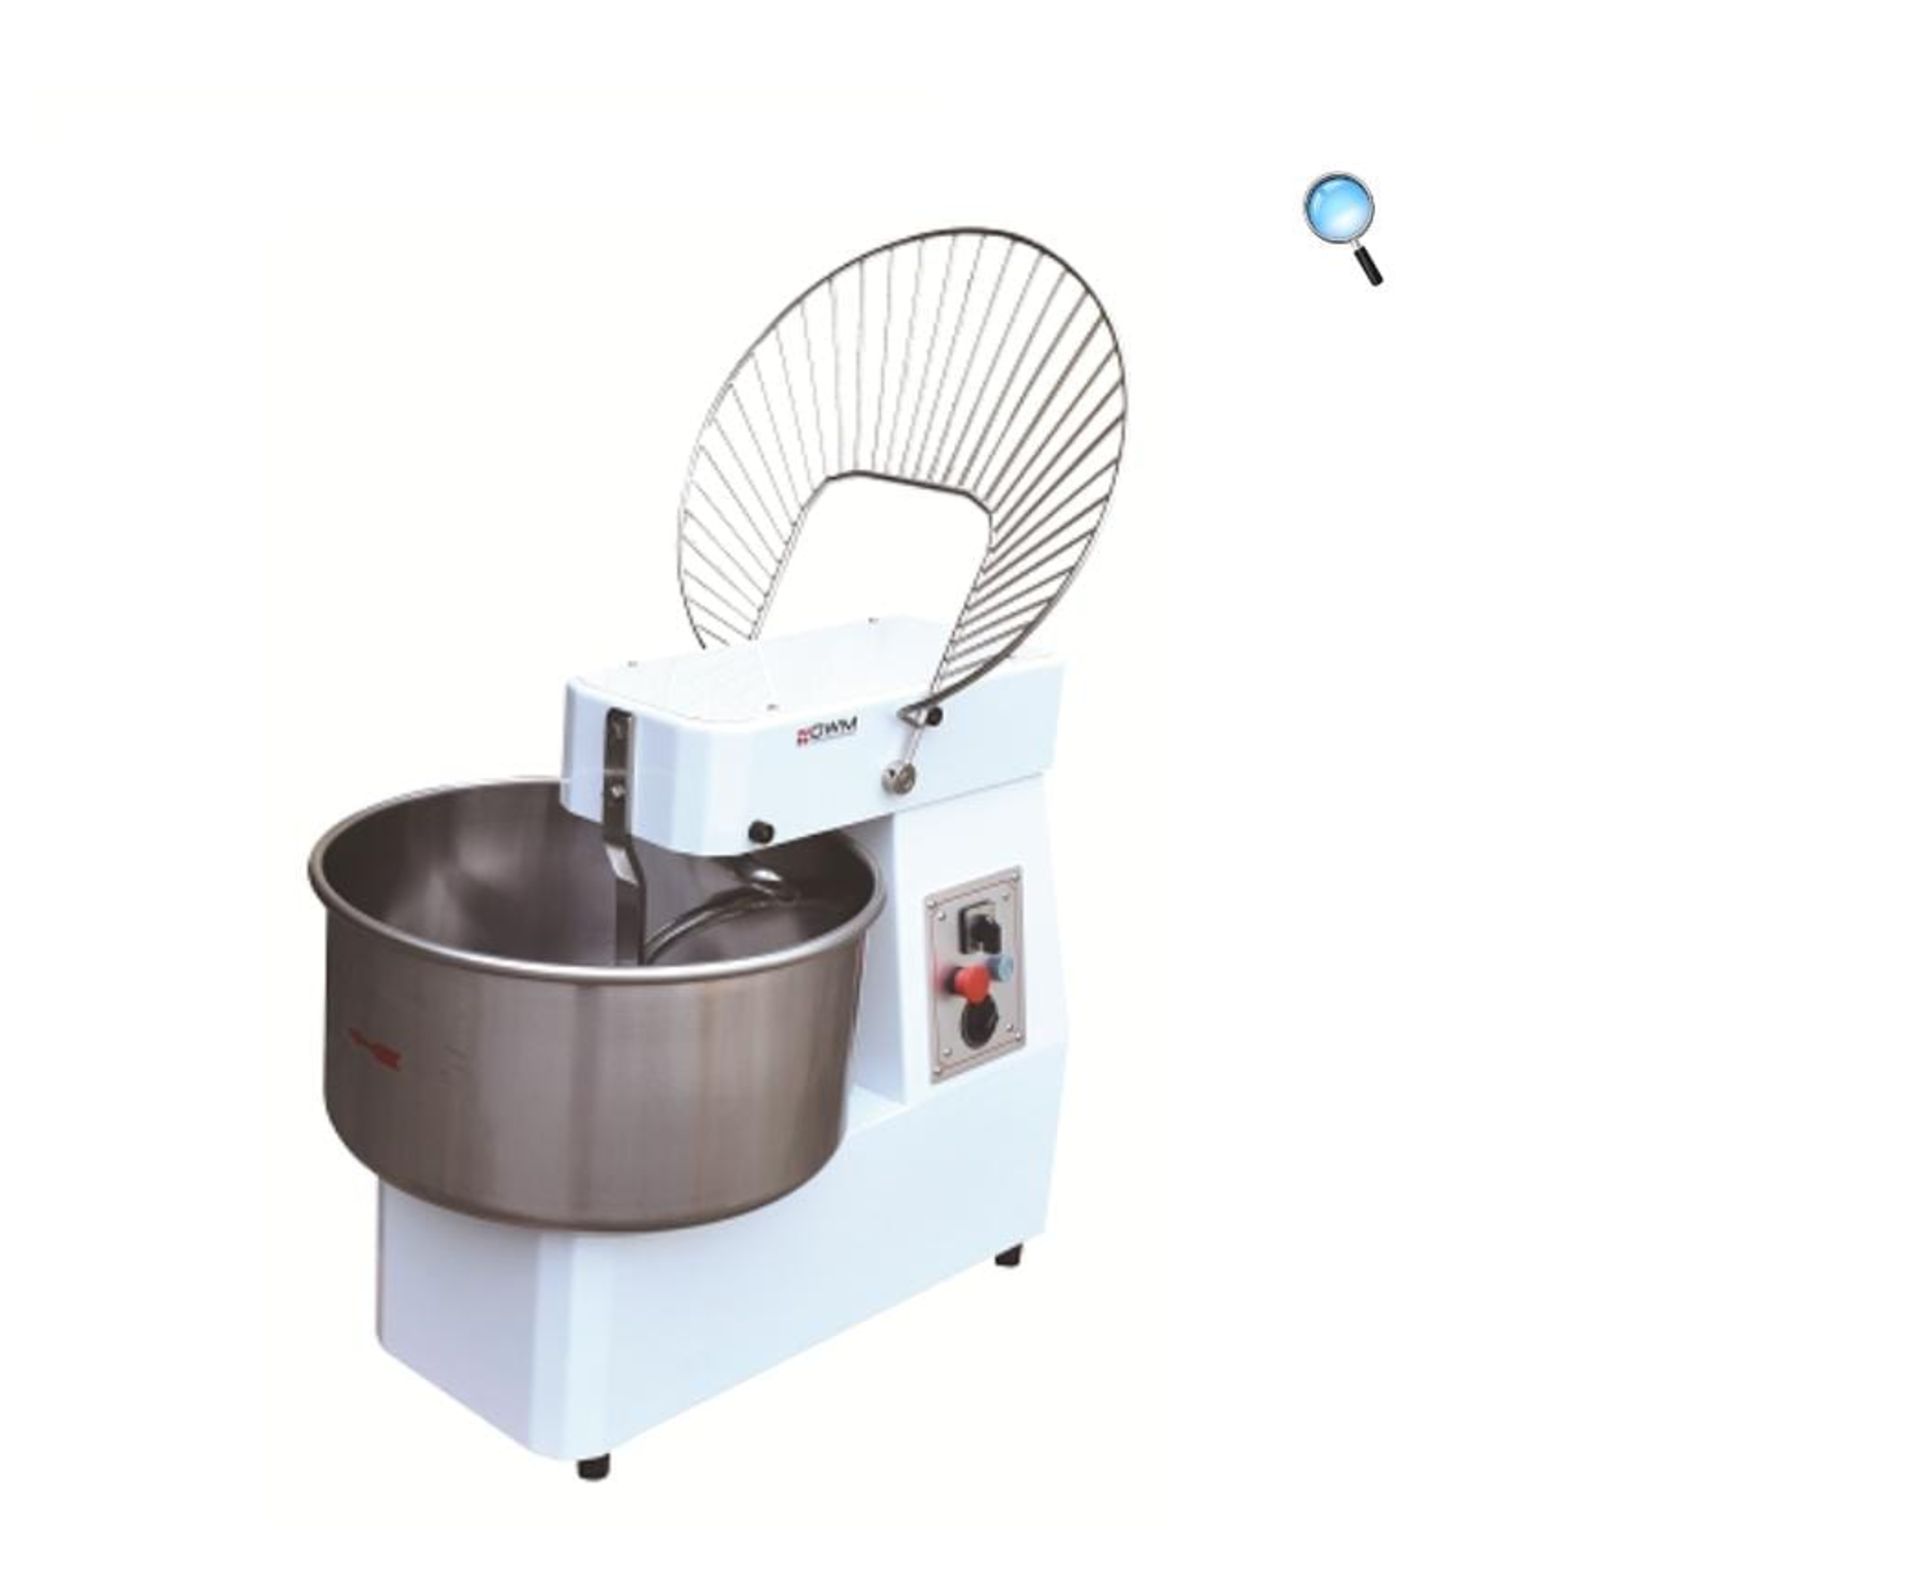 BRAND NEW 30L DOUGH MIXER SPRIAL - ITALIAN MADE - STILL IN BOX - 13 AMP UK PLUG - Image 4 of 6